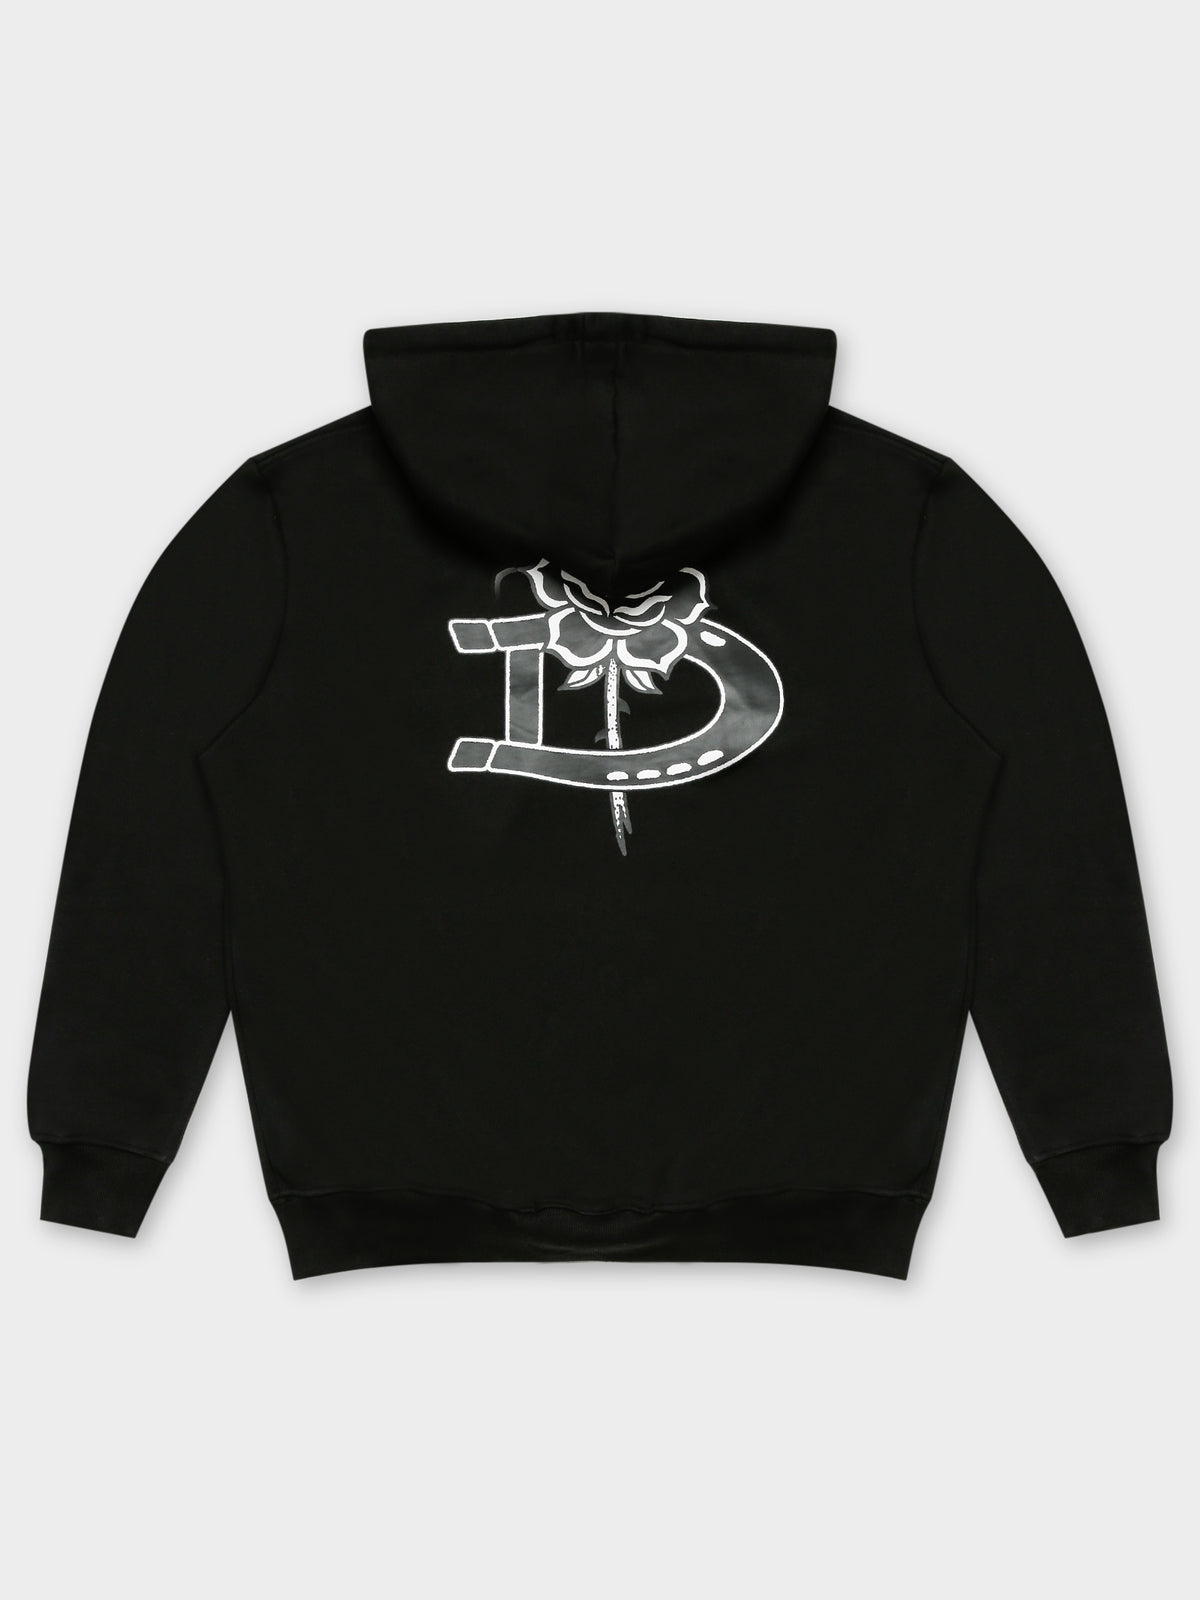 Wired Pull Over Hoodie in Black